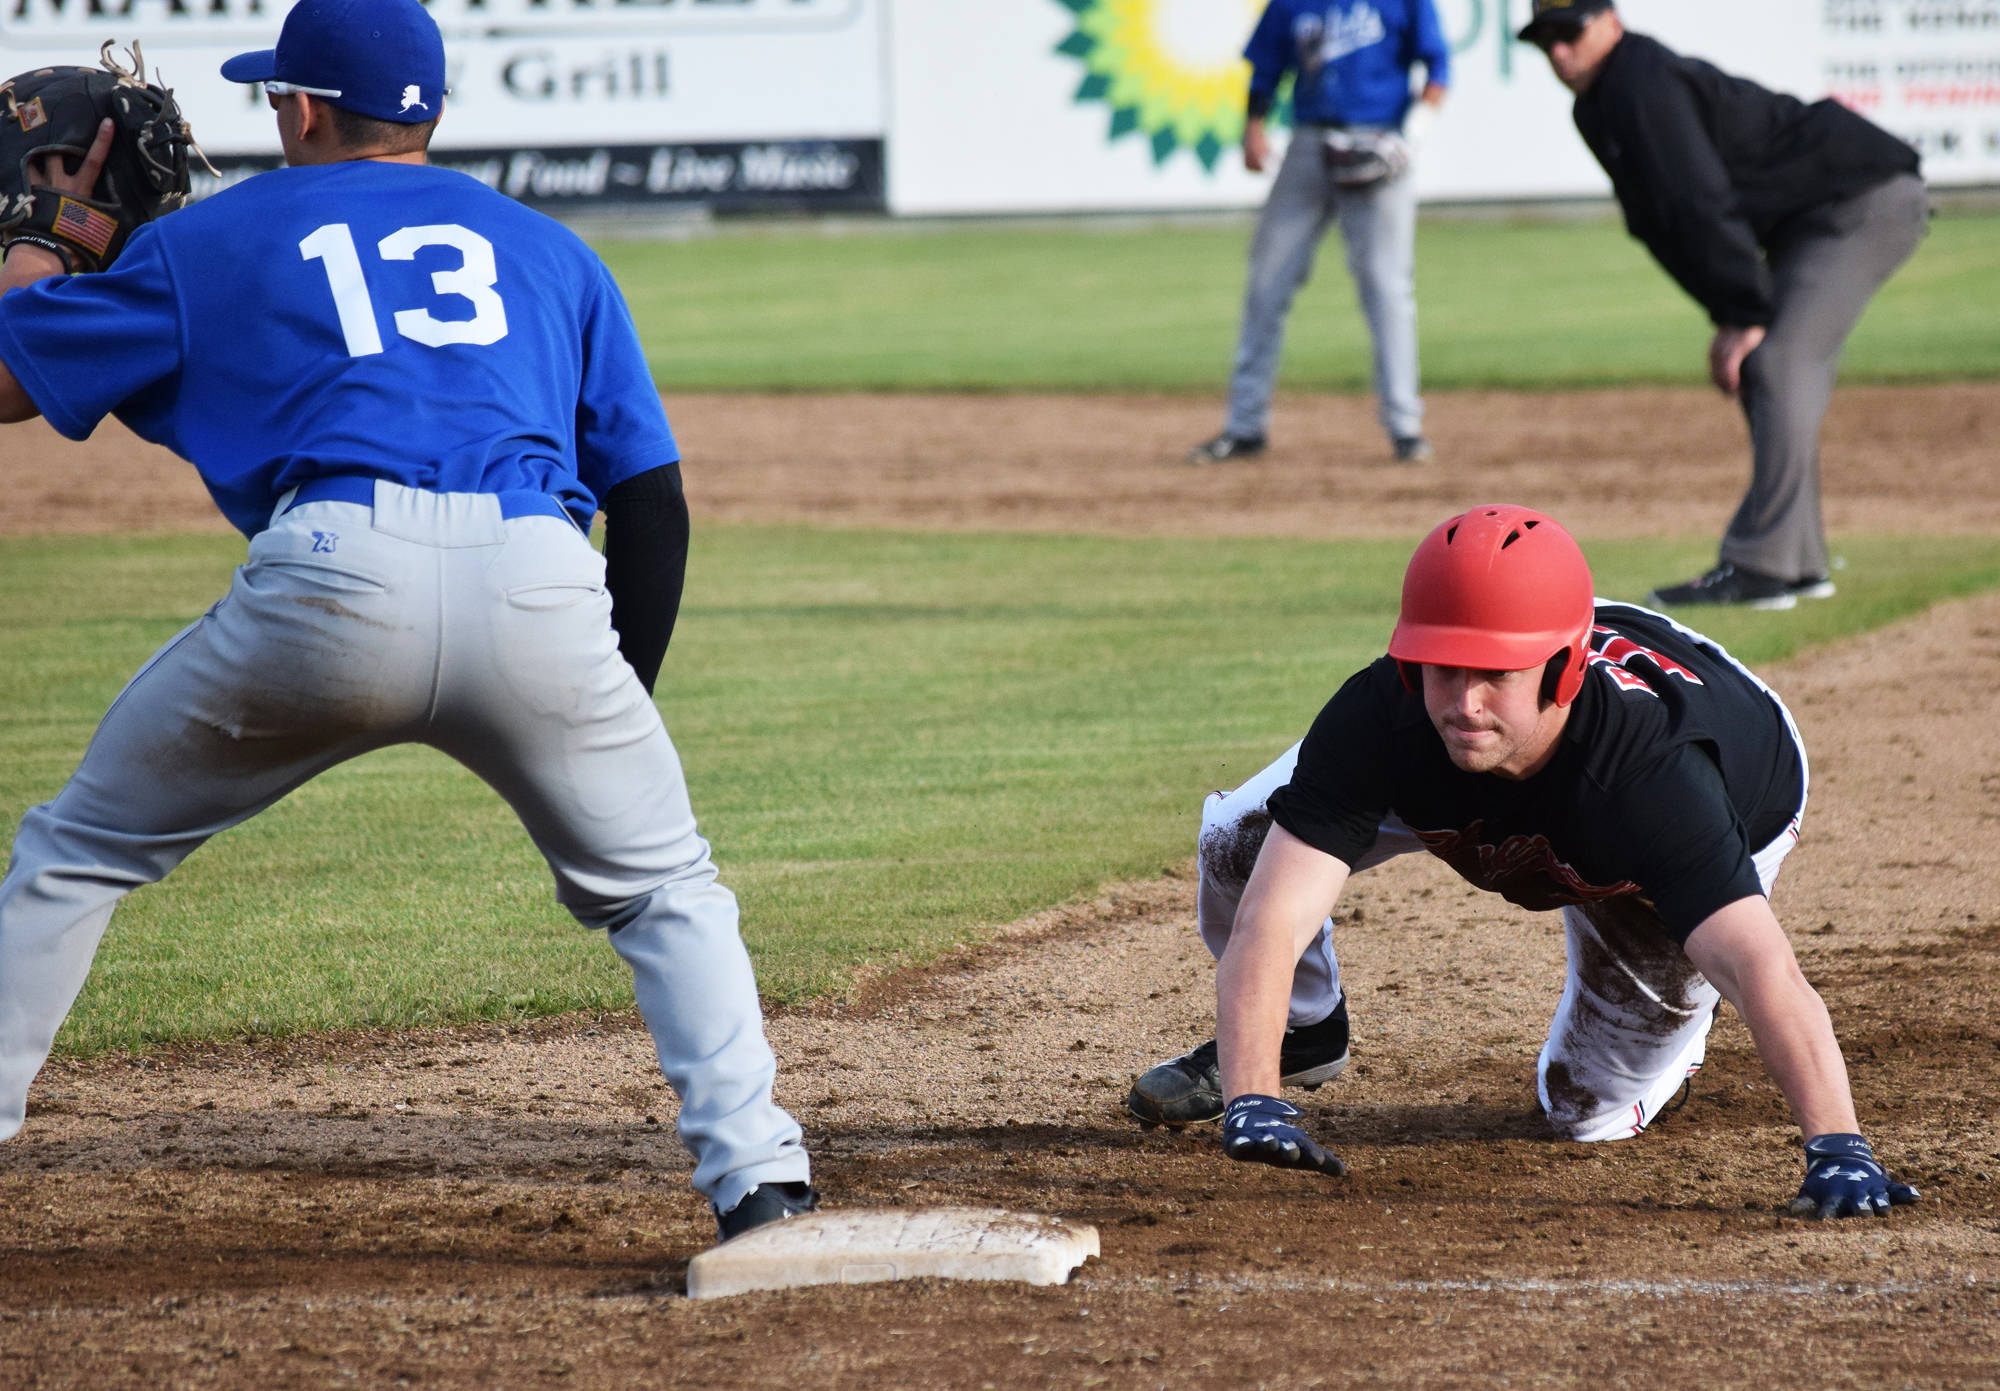 Peninsula Oilers baserunner Thomas Ruddy tags up to first base ahead of the glove of Ian Evans of the Anchorage Glacier Pilots, Friday evening at Coral Seymour Memorial Park in Kenai. (Photo by Joey Klecka/Peninsula Clarion)